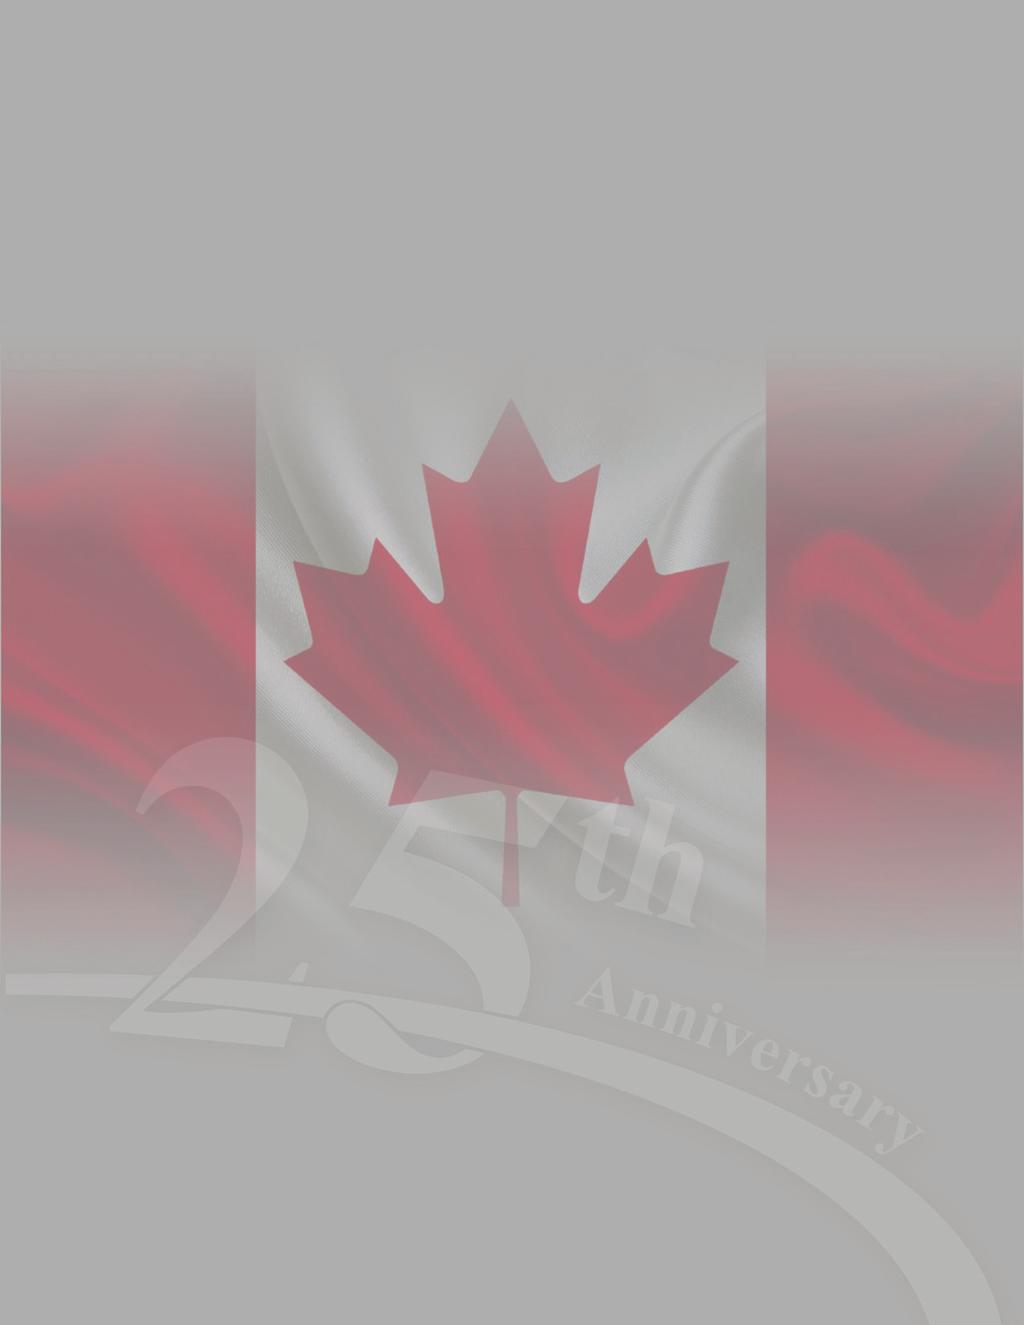 CANADIAN CERTIFICANTS In addition to U.S. resident NPs, applicants who completed approved Canadian NP programs may take the AANPCB certification examinations.